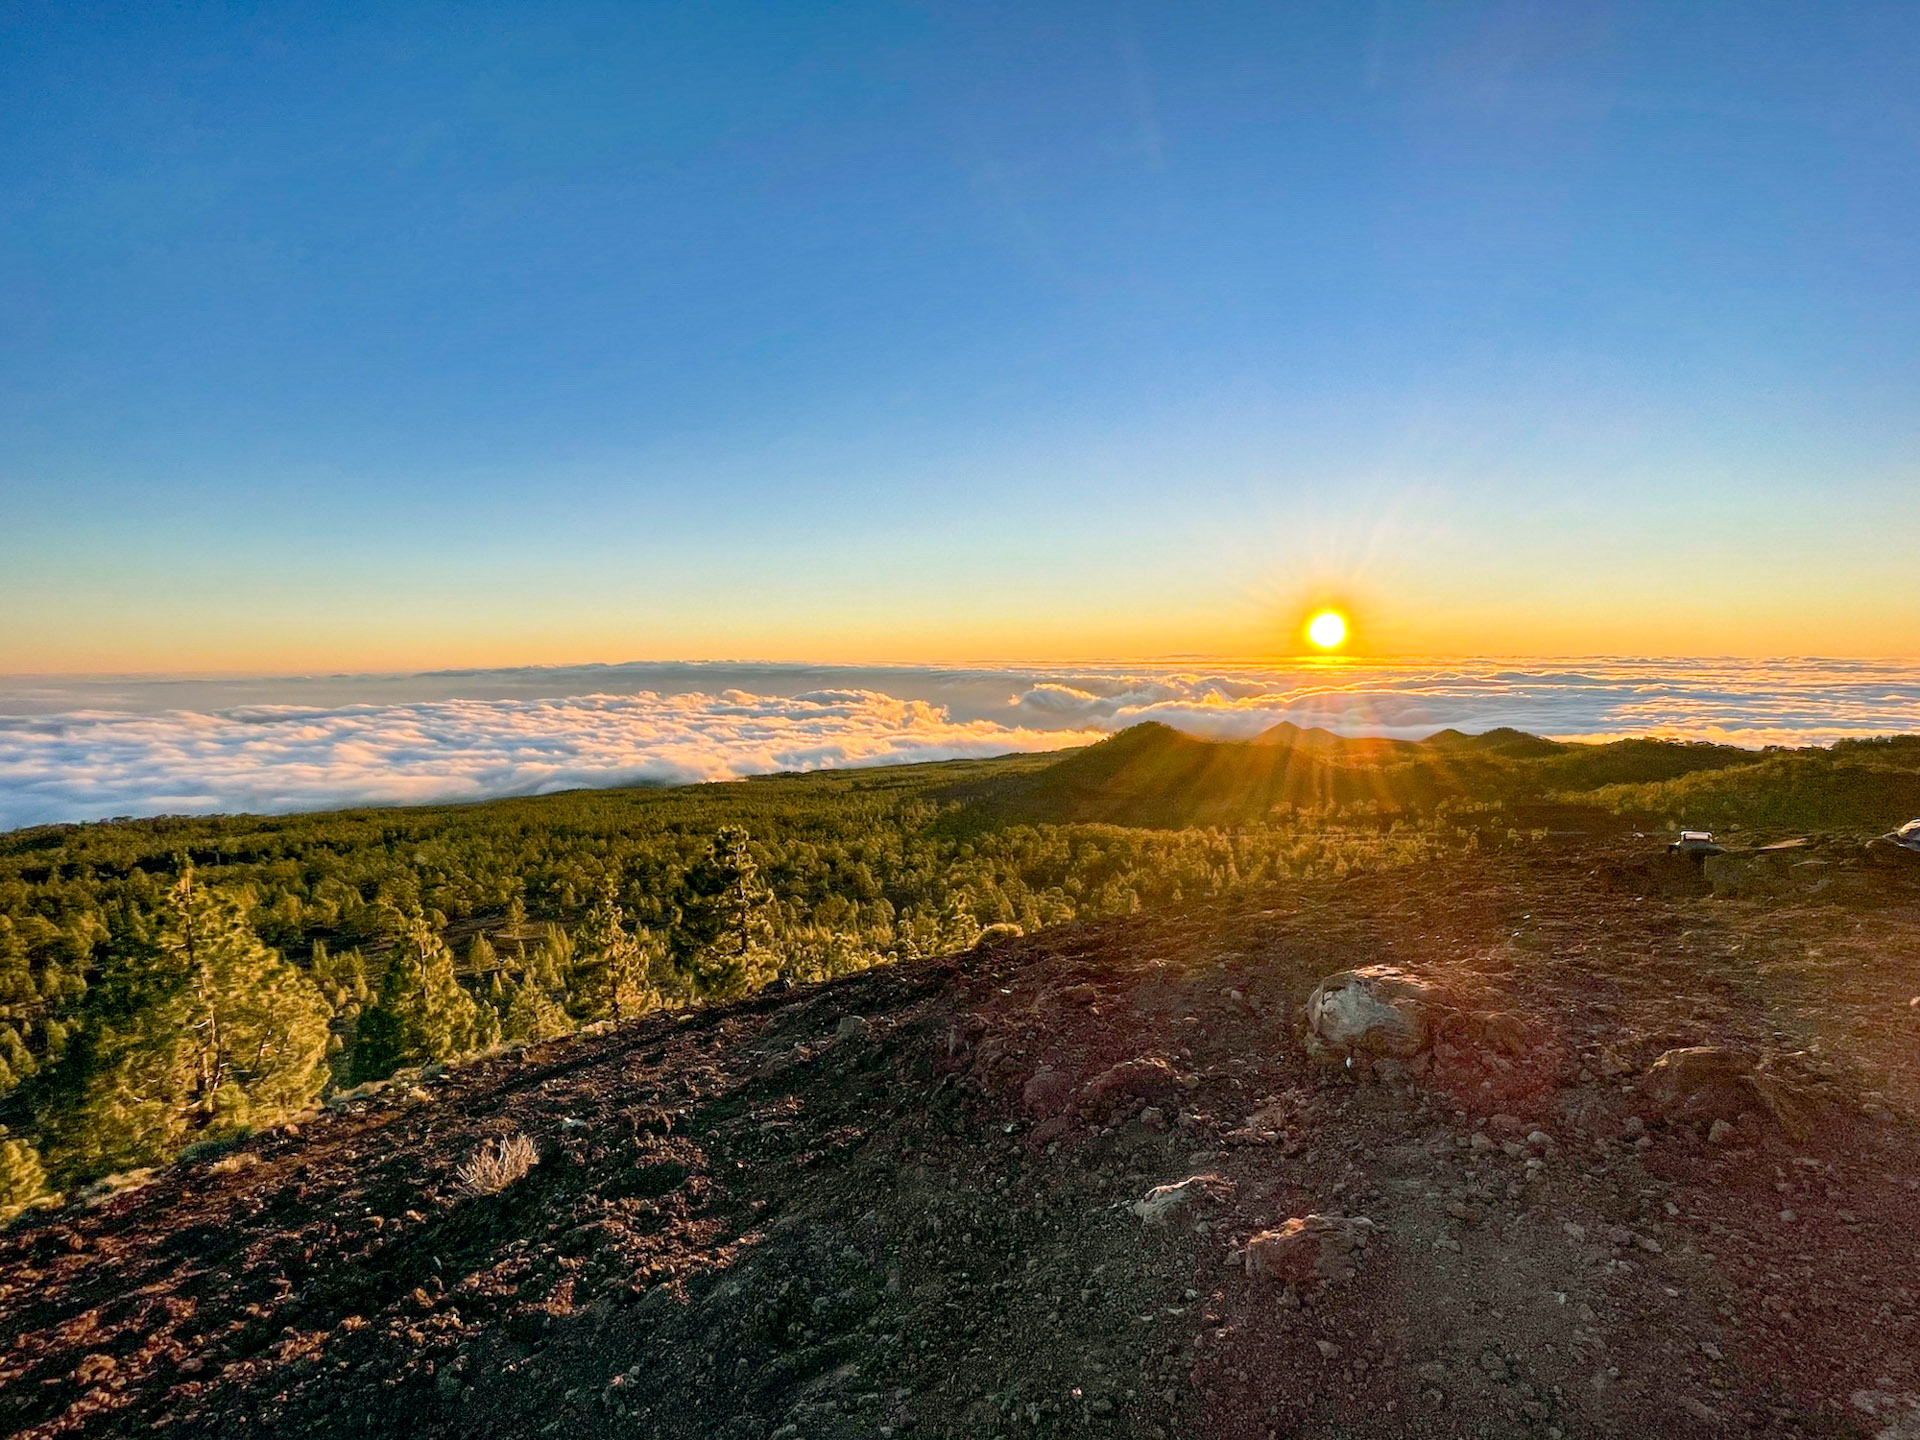 The sun setting above the clouds as seen near the top of Teide.